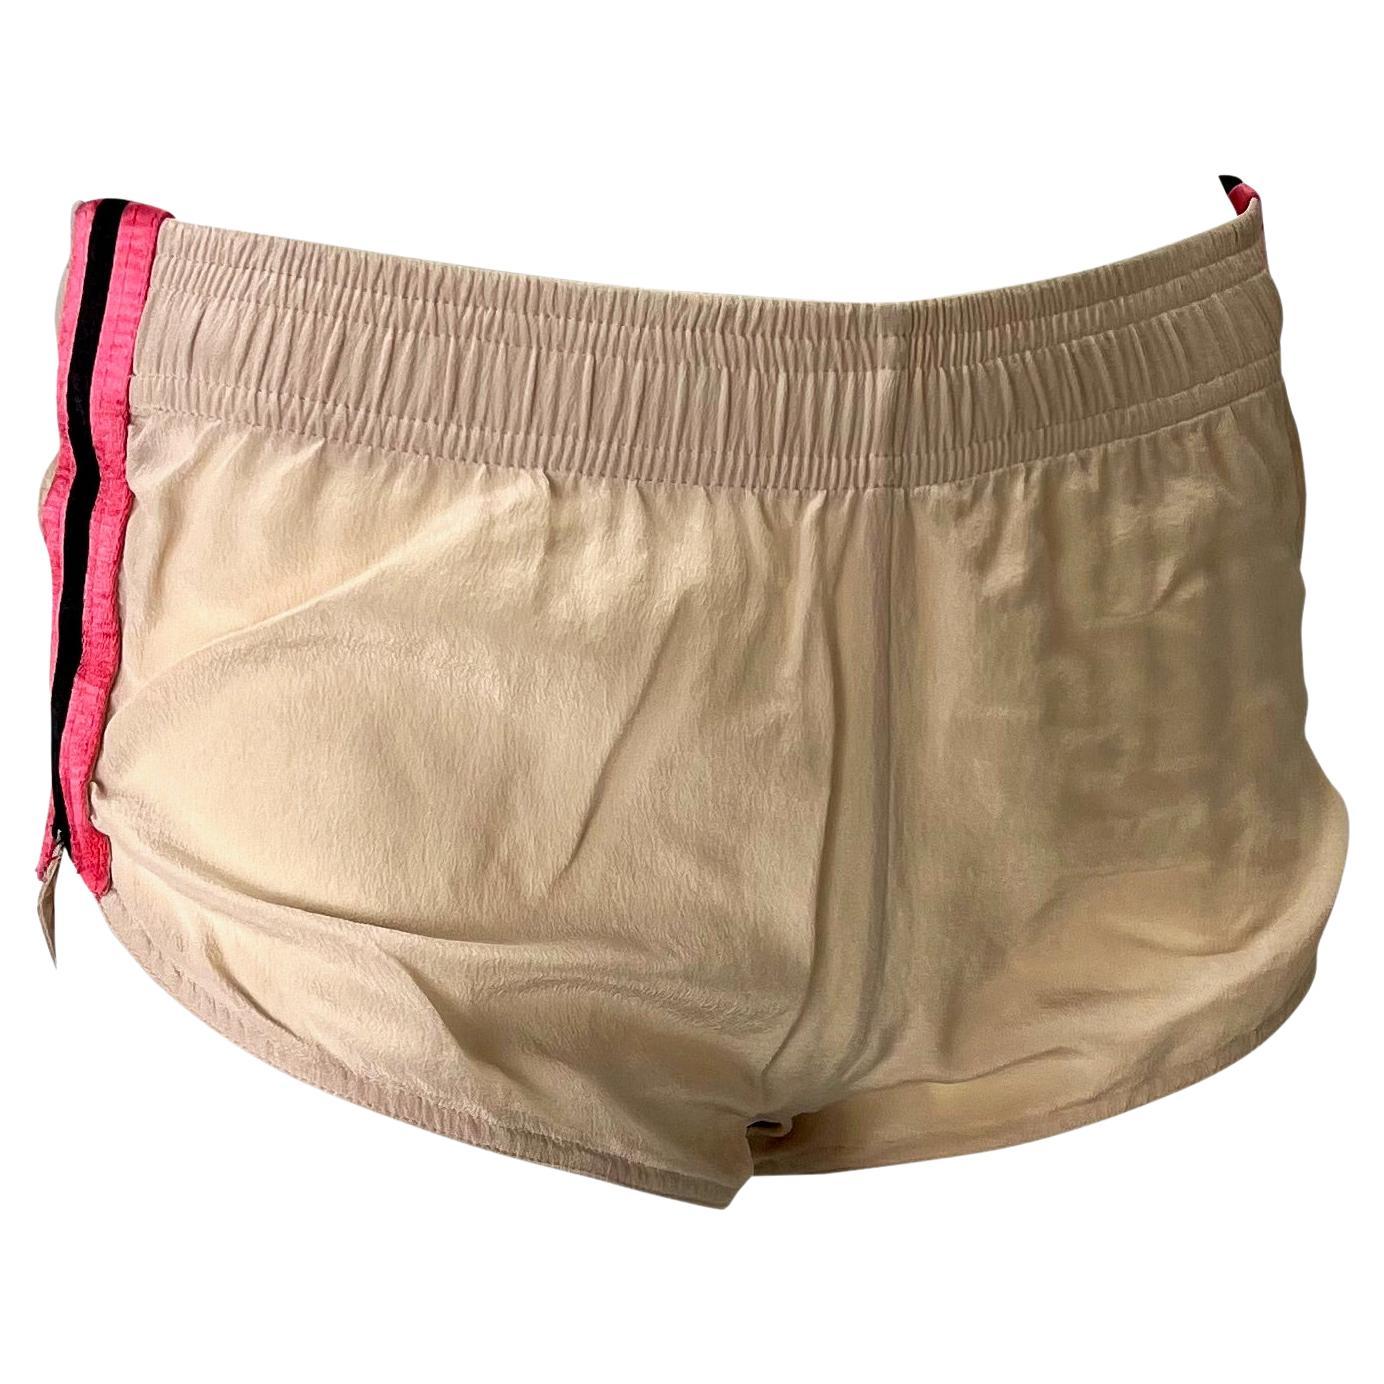 S/S 2004 Gucci by Tom Ford Runway Beige Silk Pink Stripe Mini Shorts For Sale 2